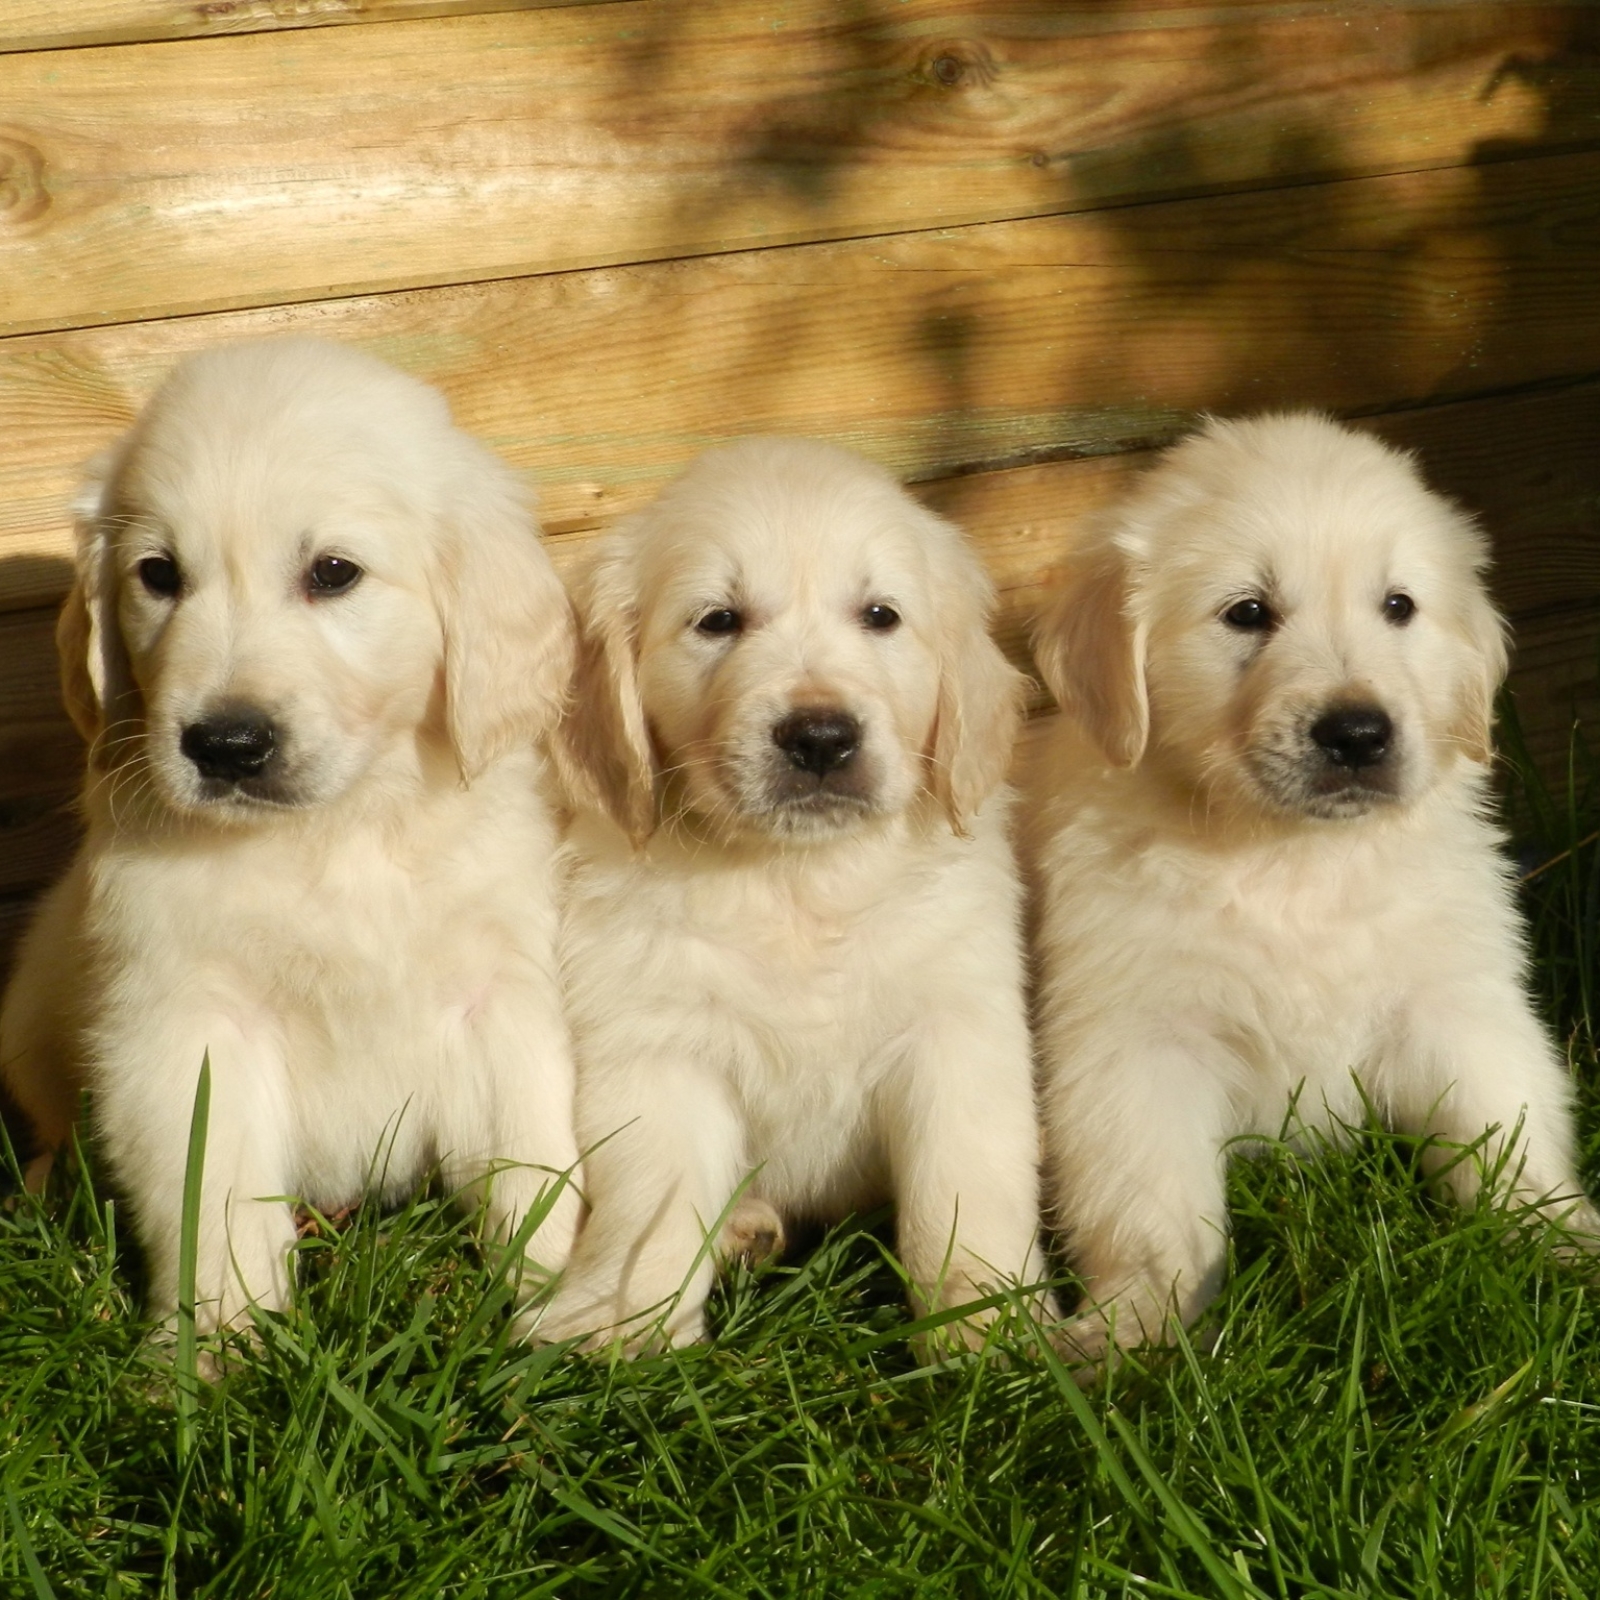 Three Cute Puppies by JacLou DL